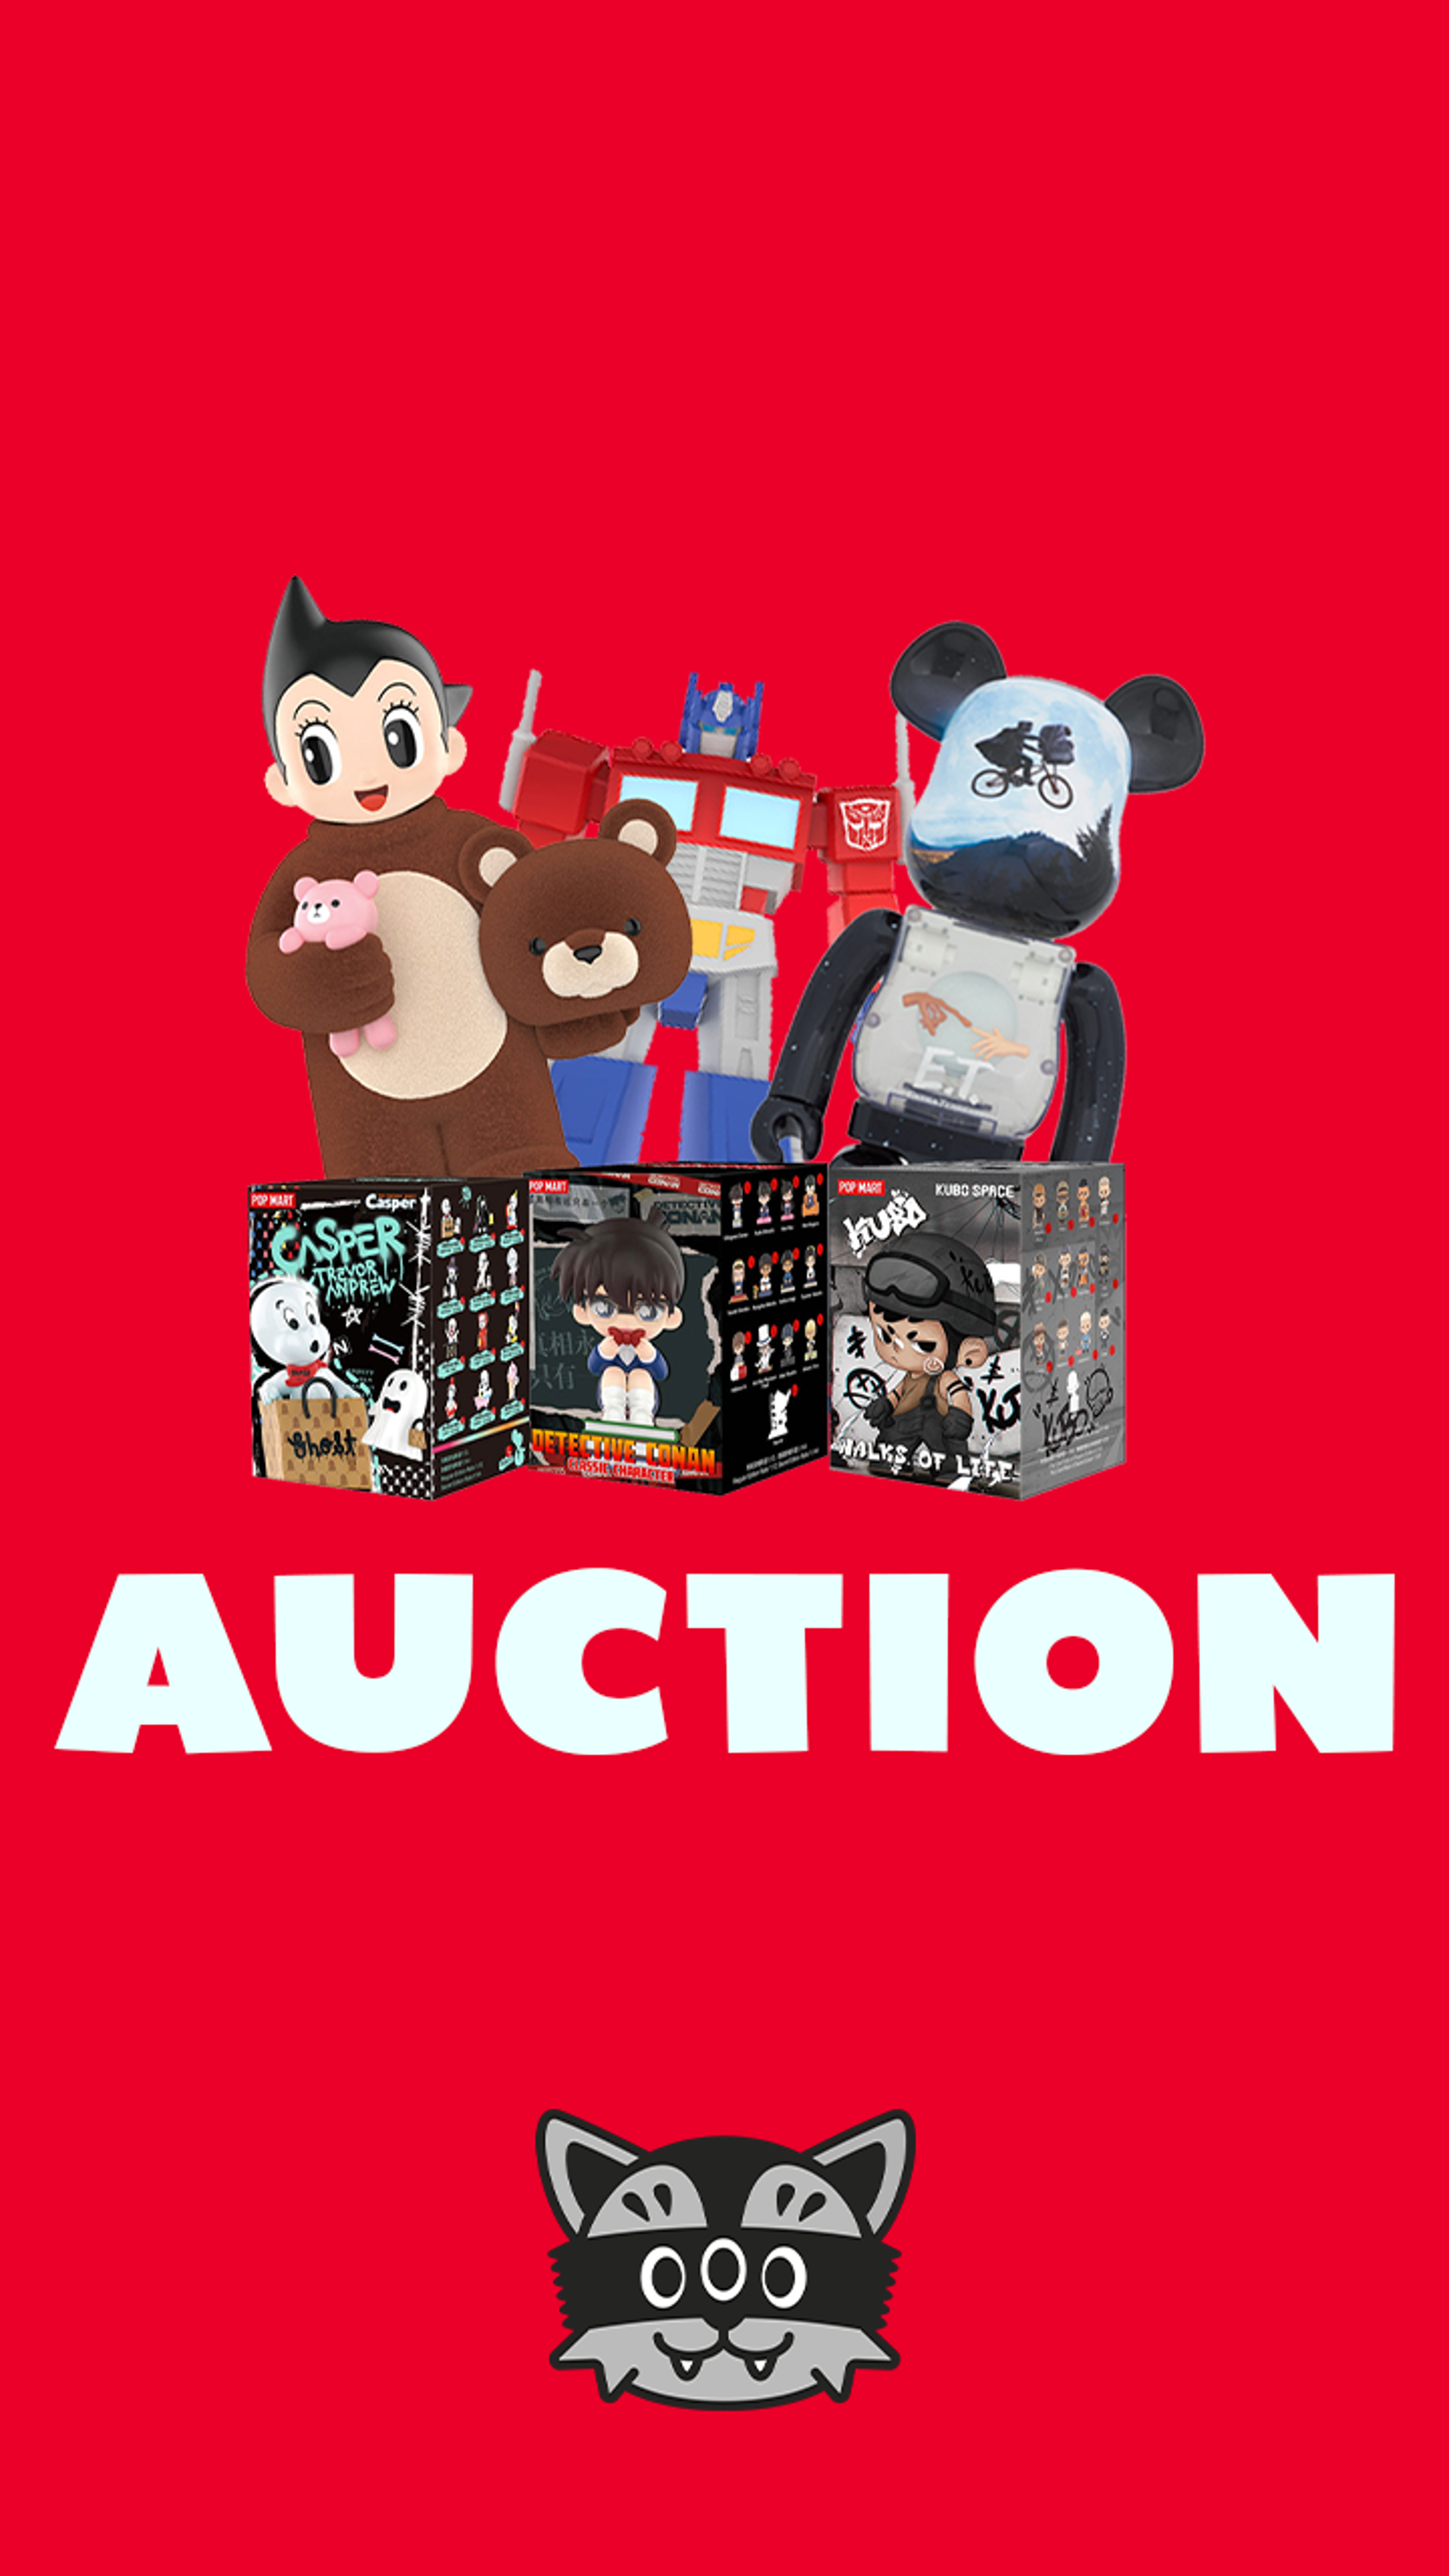 Preview image for the show titled "Mindzai Auction - April 29" at Monday @ 5:00 PM